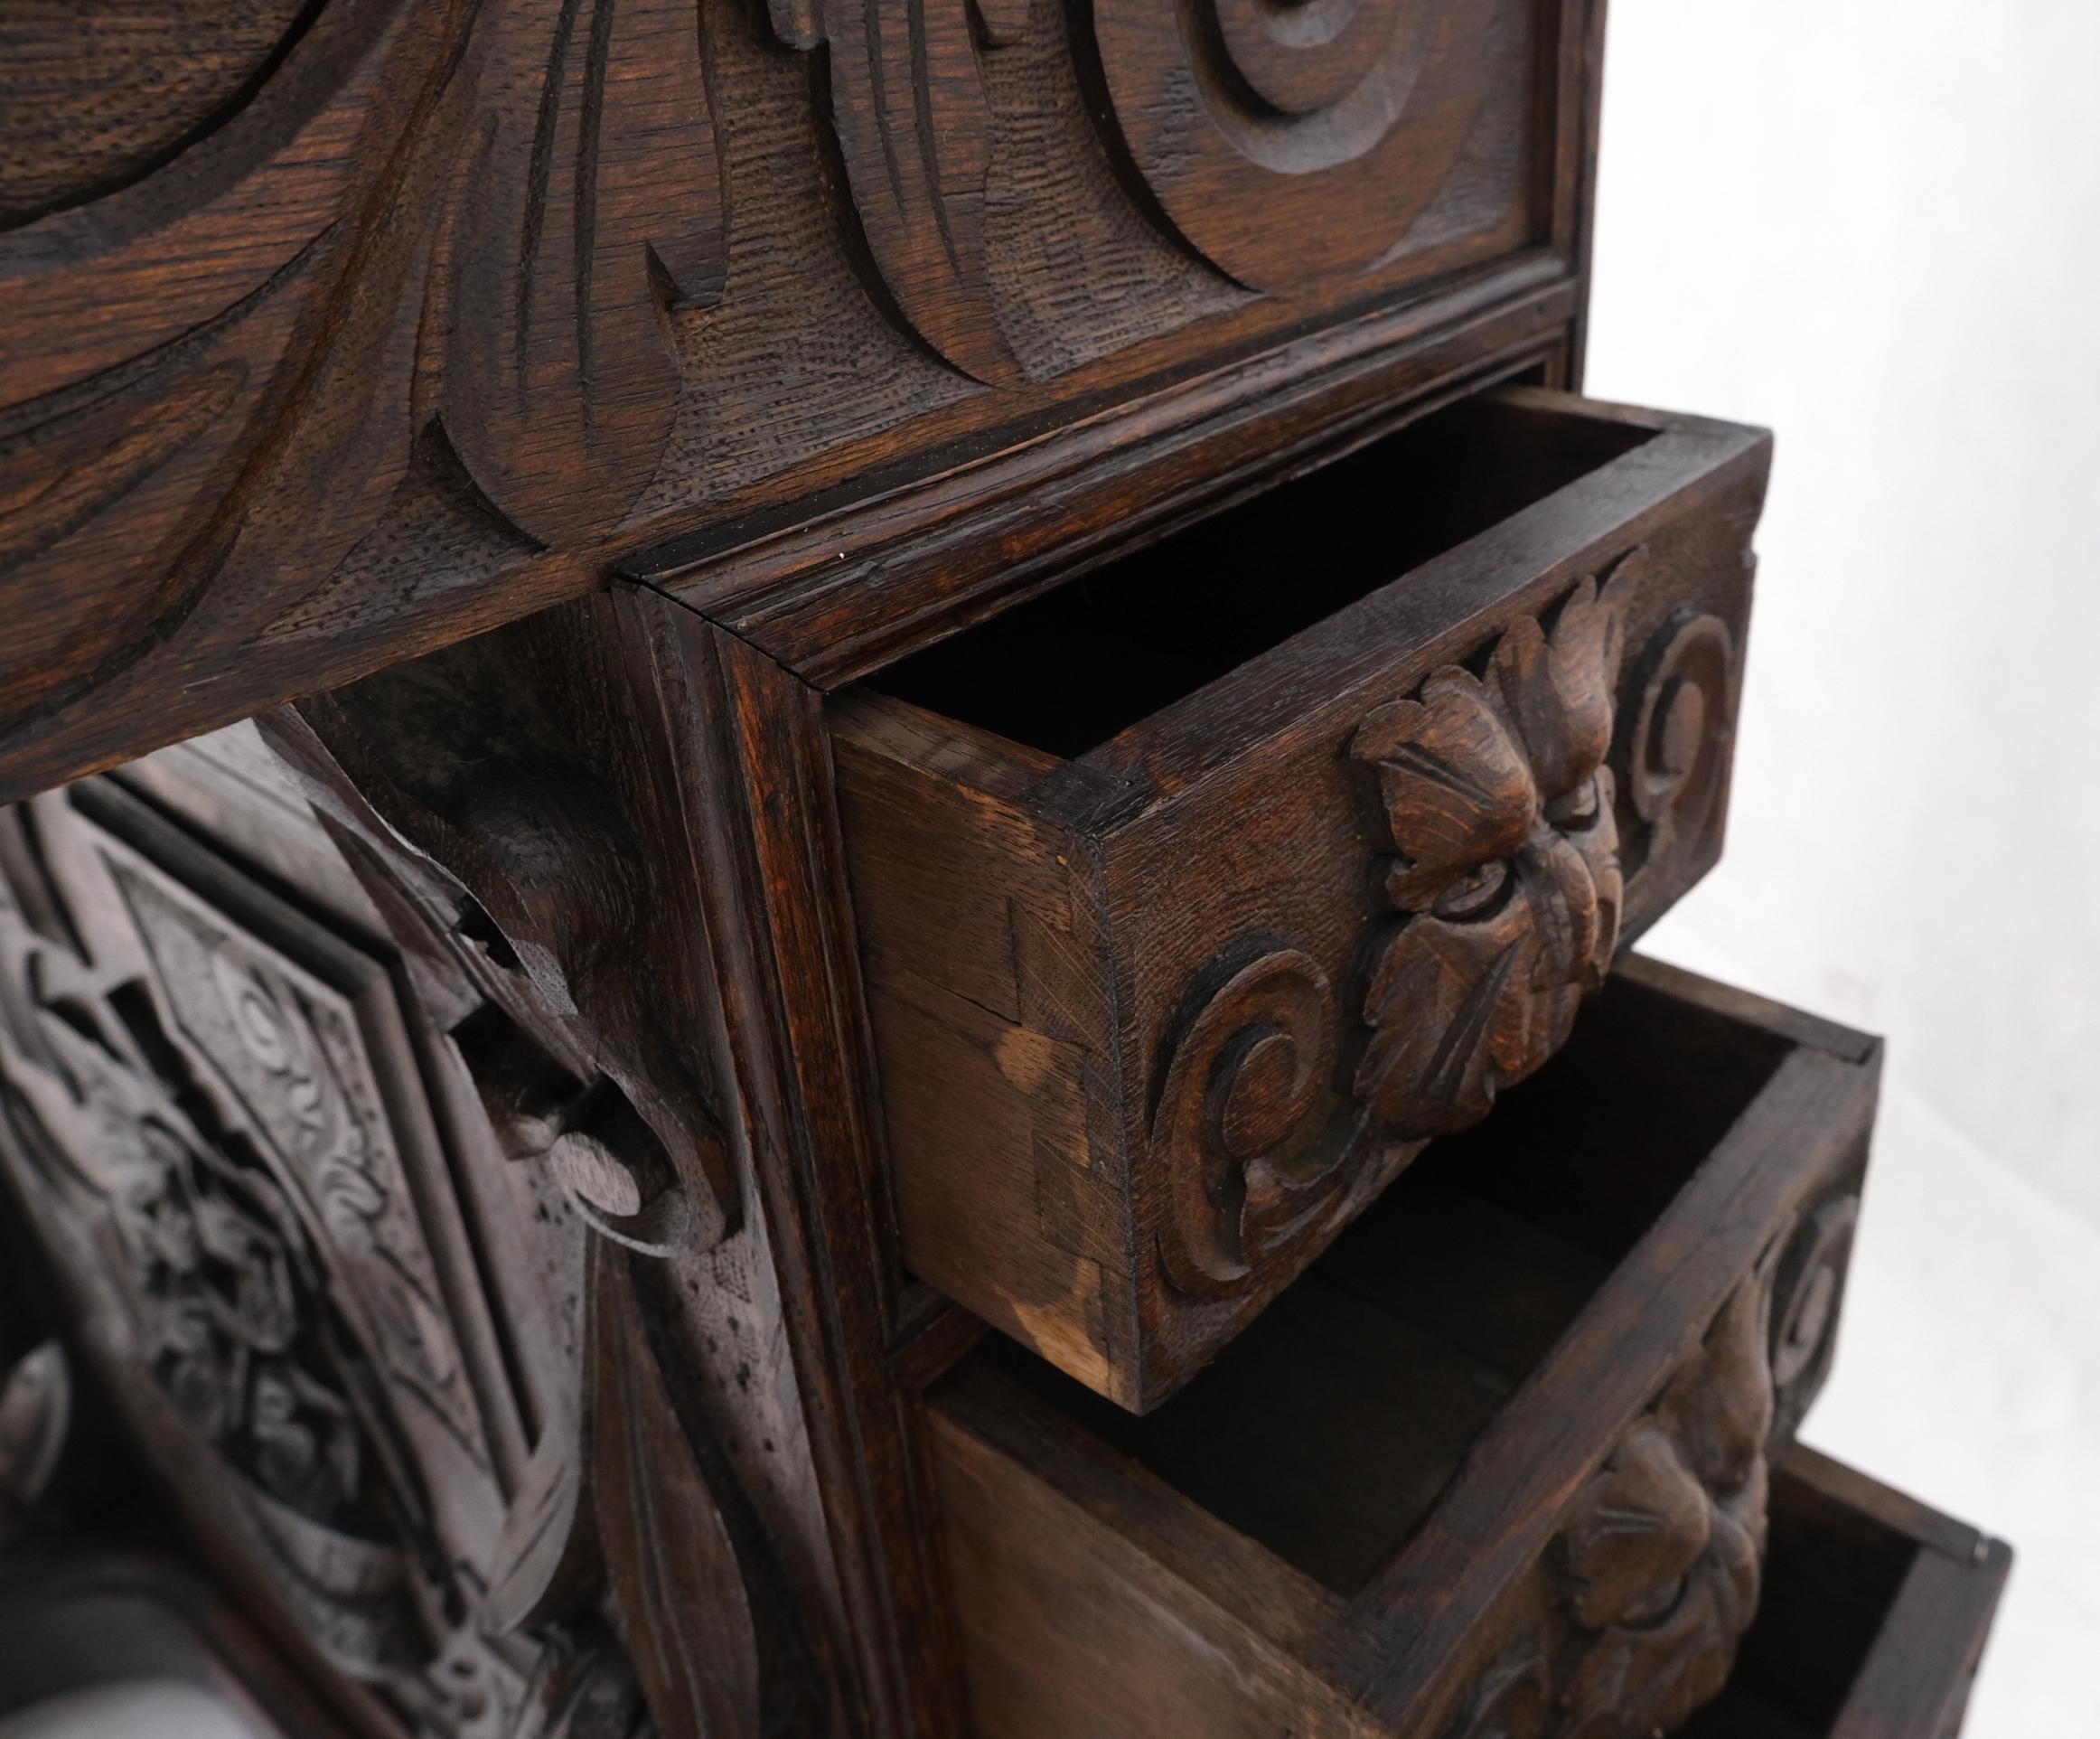 19th Century Davenport Heavily Carved Oak Desk w/ Rope Twist Supports 4 Drawers For Sale 3